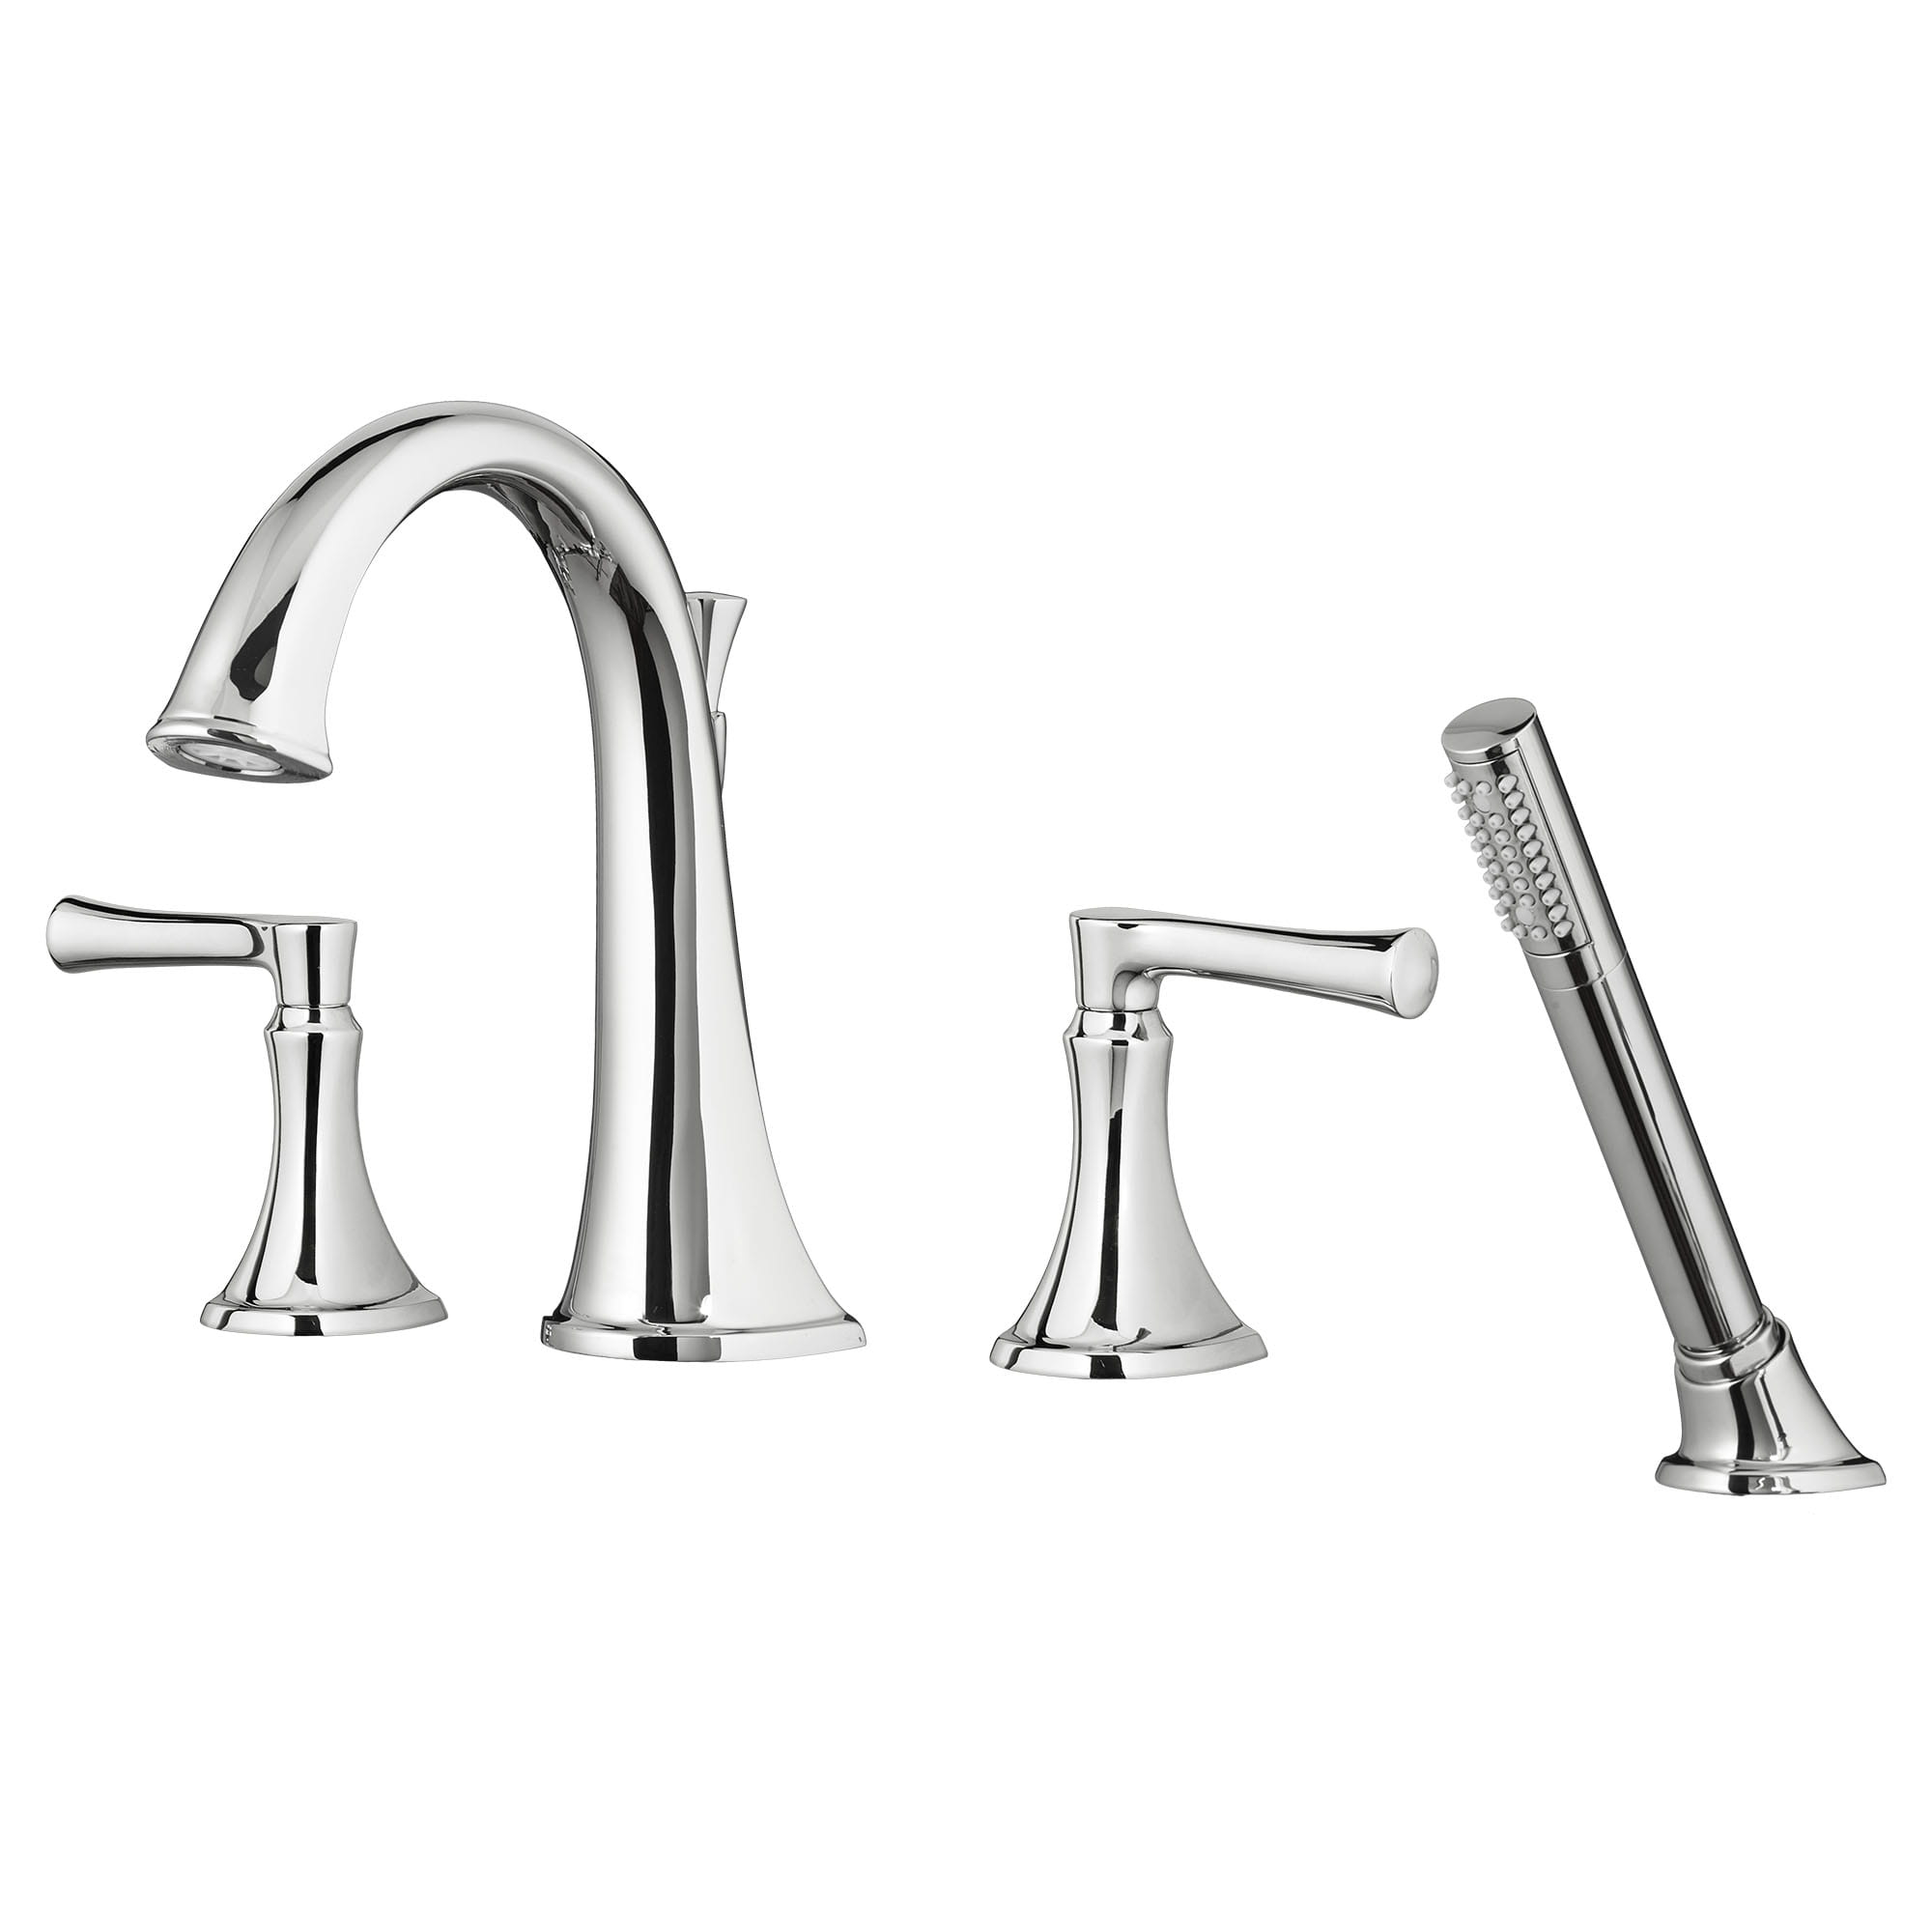 Estate® Bathtub Faucet With Personal Shower for Flash® Rough-In Valve With Lever Handles